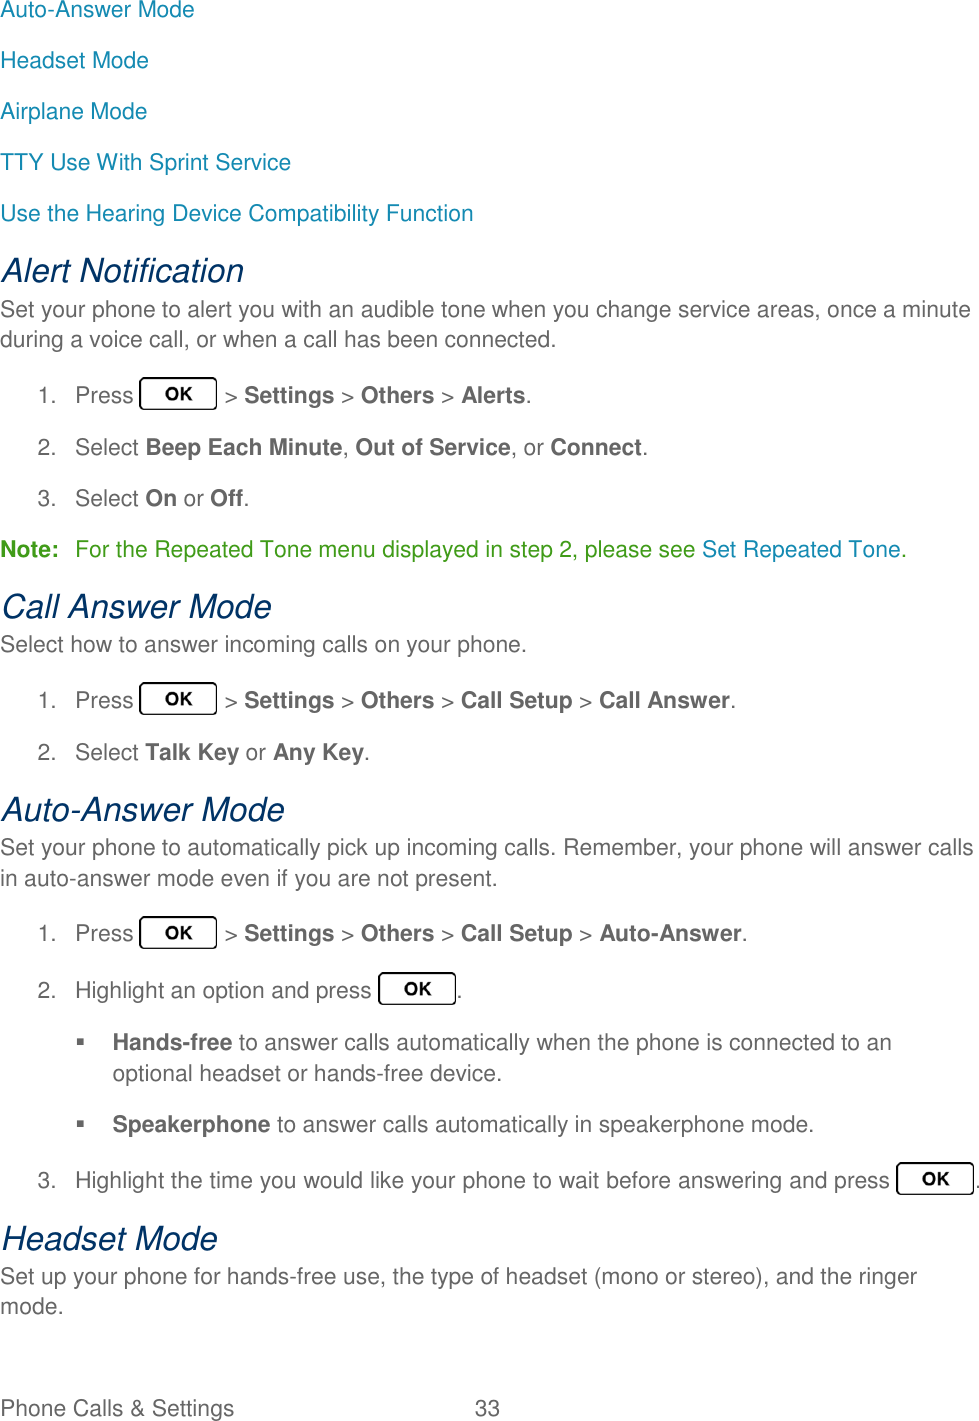 Phone Calls &amp; Settings  33   Auto-Answer Mode Headset Mode Airplane Mode TTY Use With Sprint Service Use the Hearing Device Compatibility Function Alert Notification Set your phone to alert you with an audible tone when you change service areas, once a minute during a voice call, or when a call has been connected. 1.  Press   &gt; Settings &gt; Others &gt; Alerts. 2.  Select Beep Each Minute, Out of Service, or Connect. 3.  Select On or Off. Note:  For the Repeated Tone menu displayed in step 2, please see Set Repeated Tone. Call Answer Mode Select how to answer incoming calls on your phone. 1.  Press   &gt; Settings &gt; Others &gt; Call Setup &gt; Call Answer. 2.  Select Talk Key or Any Key. Auto-Answer Mode Set your phone to automatically pick up incoming calls. Remember, your phone will answer calls in auto-answer mode even if you are not present. 1.  Press   &gt; Settings &gt; Others &gt; Call Setup &gt; Auto-Answer. 2.  Highlight an option and press  .  Hands-free to answer calls automatically when the phone is connected to an optional headset or hands-free device.  Speakerphone to answer calls automatically in speakerphone mode. 3.  Highlight the time you would like your phone to wait before answering and press  . Headset Mode Set up your phone for hands-free use, the type of headset (mono or stereo), and the ringer mode. 